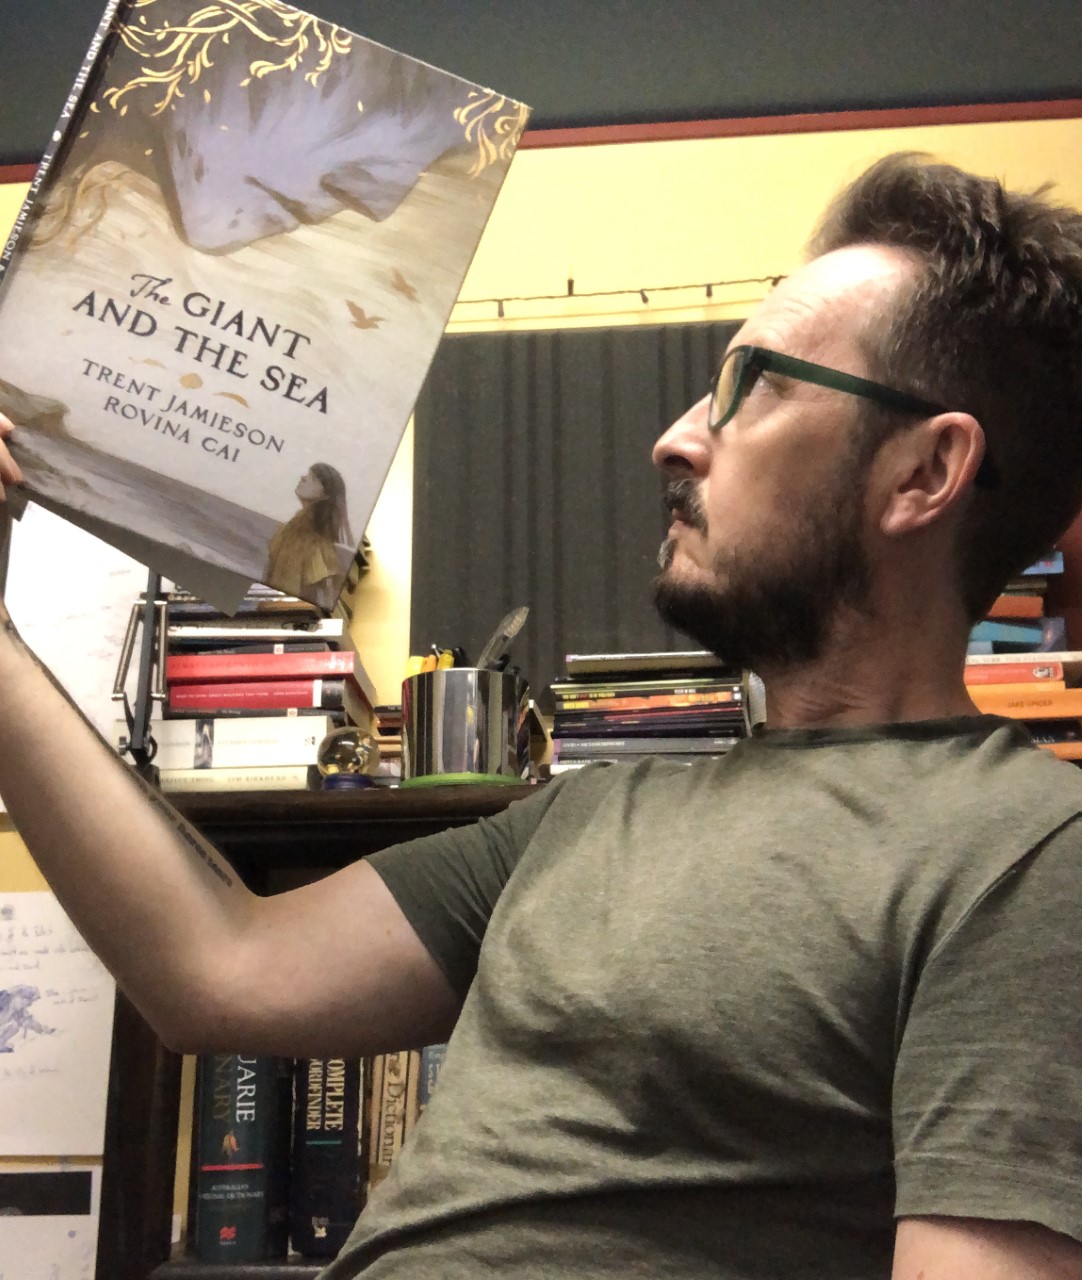 Trent Jamieson holds up a copy of his book, The Giant and the Sea. Behind him are books on shelves